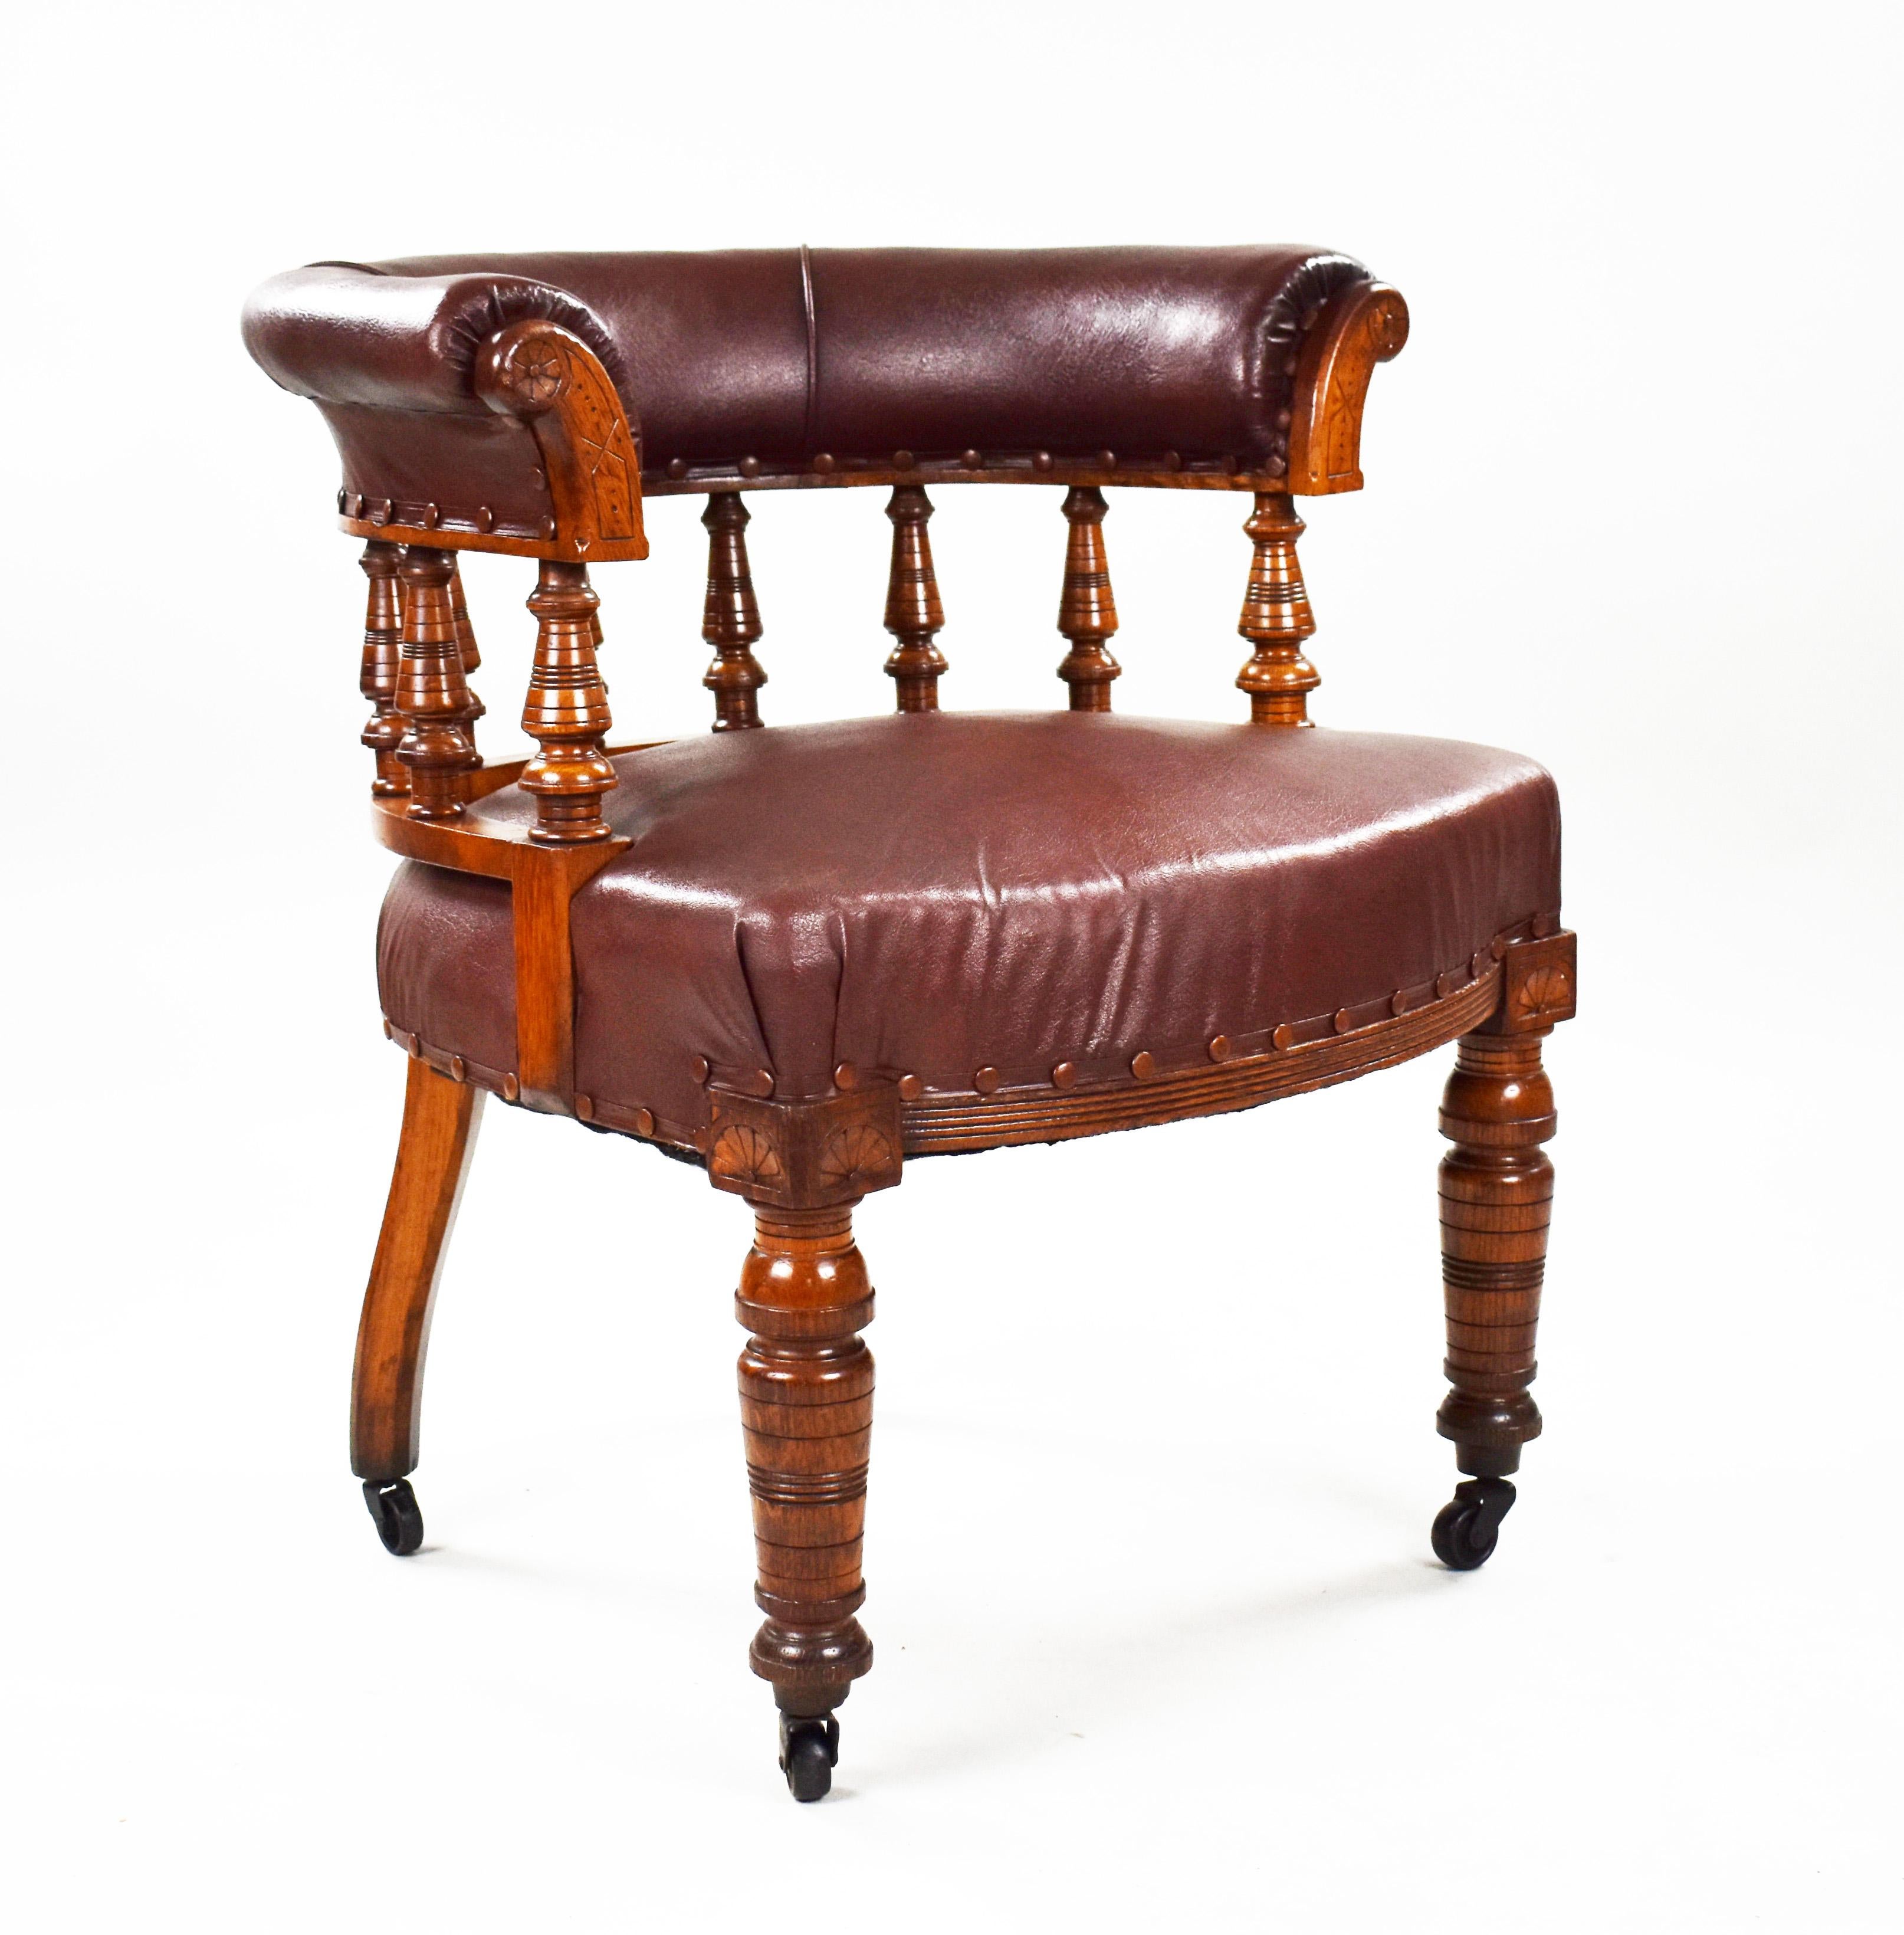 For sale is a good quality Victorian oak armchair, remaining in very good condition for its age. 

Measures: width: 72cm, depth: 57cm, height: 78cm.